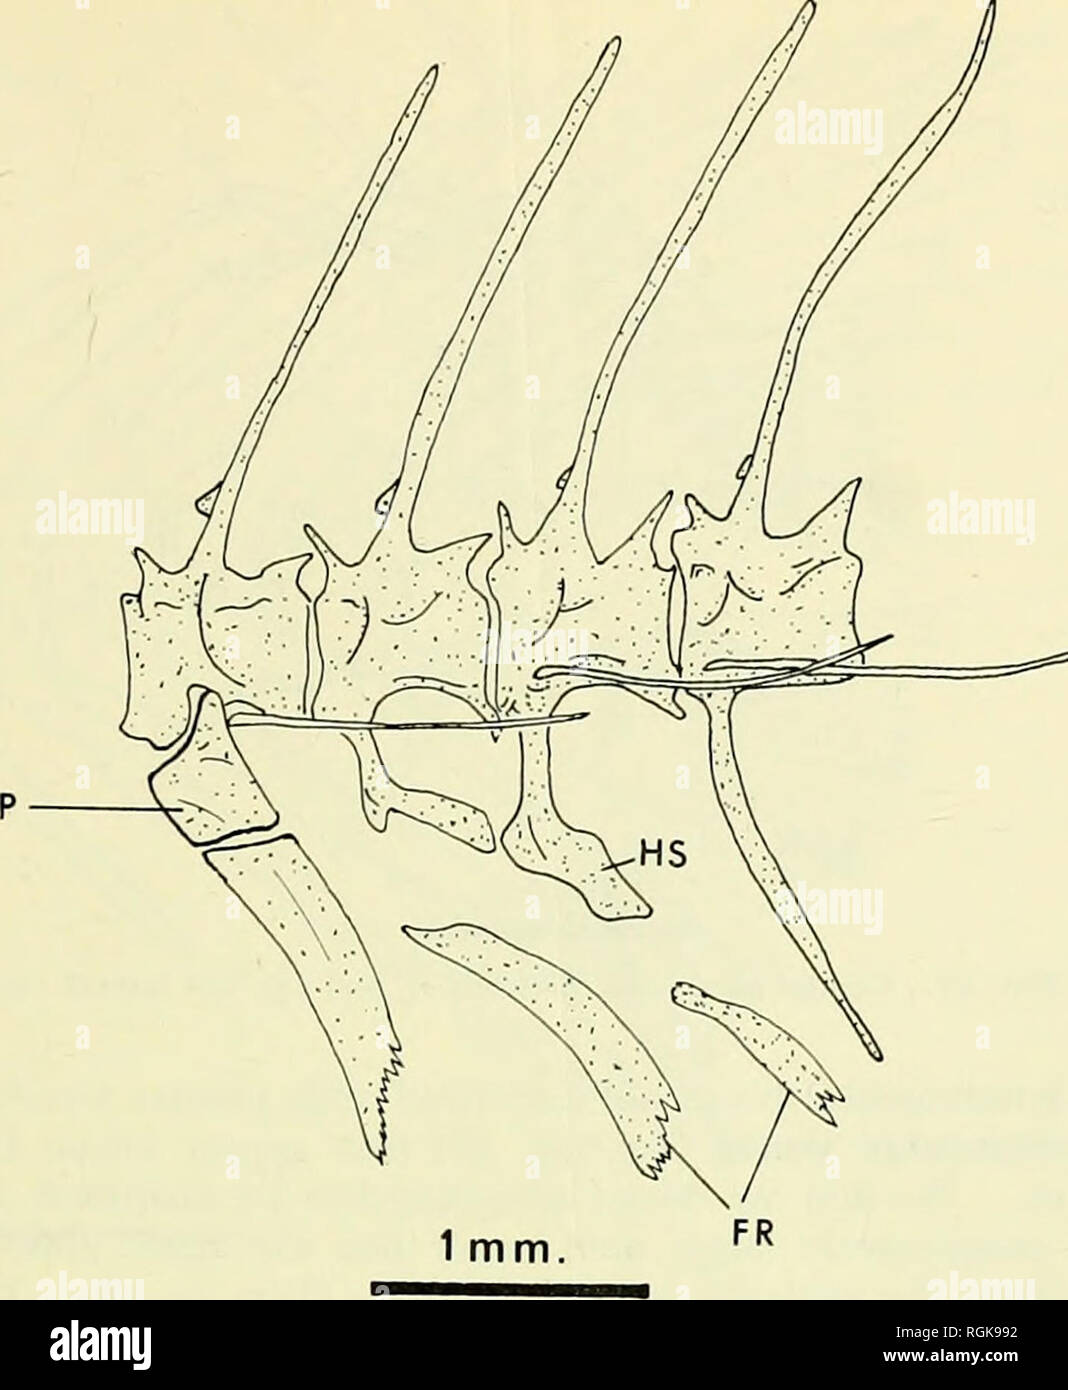 . Bulletin of the British Museum (Natural History). OSTEOLOGY OF THE DENTICI PI TI D AE 251. Fig. 27. Transition between abdominal and caudal vertebrae, showing the last pleural rib, its parapophysis-like process (P), and the two &quot; floating &quot; ribs (FR); left lateral view. the fifth to the first preural, the shelf is absent and consequently there is only one aperture between the centrum and the neural spine. Preural vertebrae 3 to 5 have a longer haemal arch base than do the preceding elements, and a foramen is present in it. The neural spines of preural vertebrae 2-5 are expanded ant Stock Photo